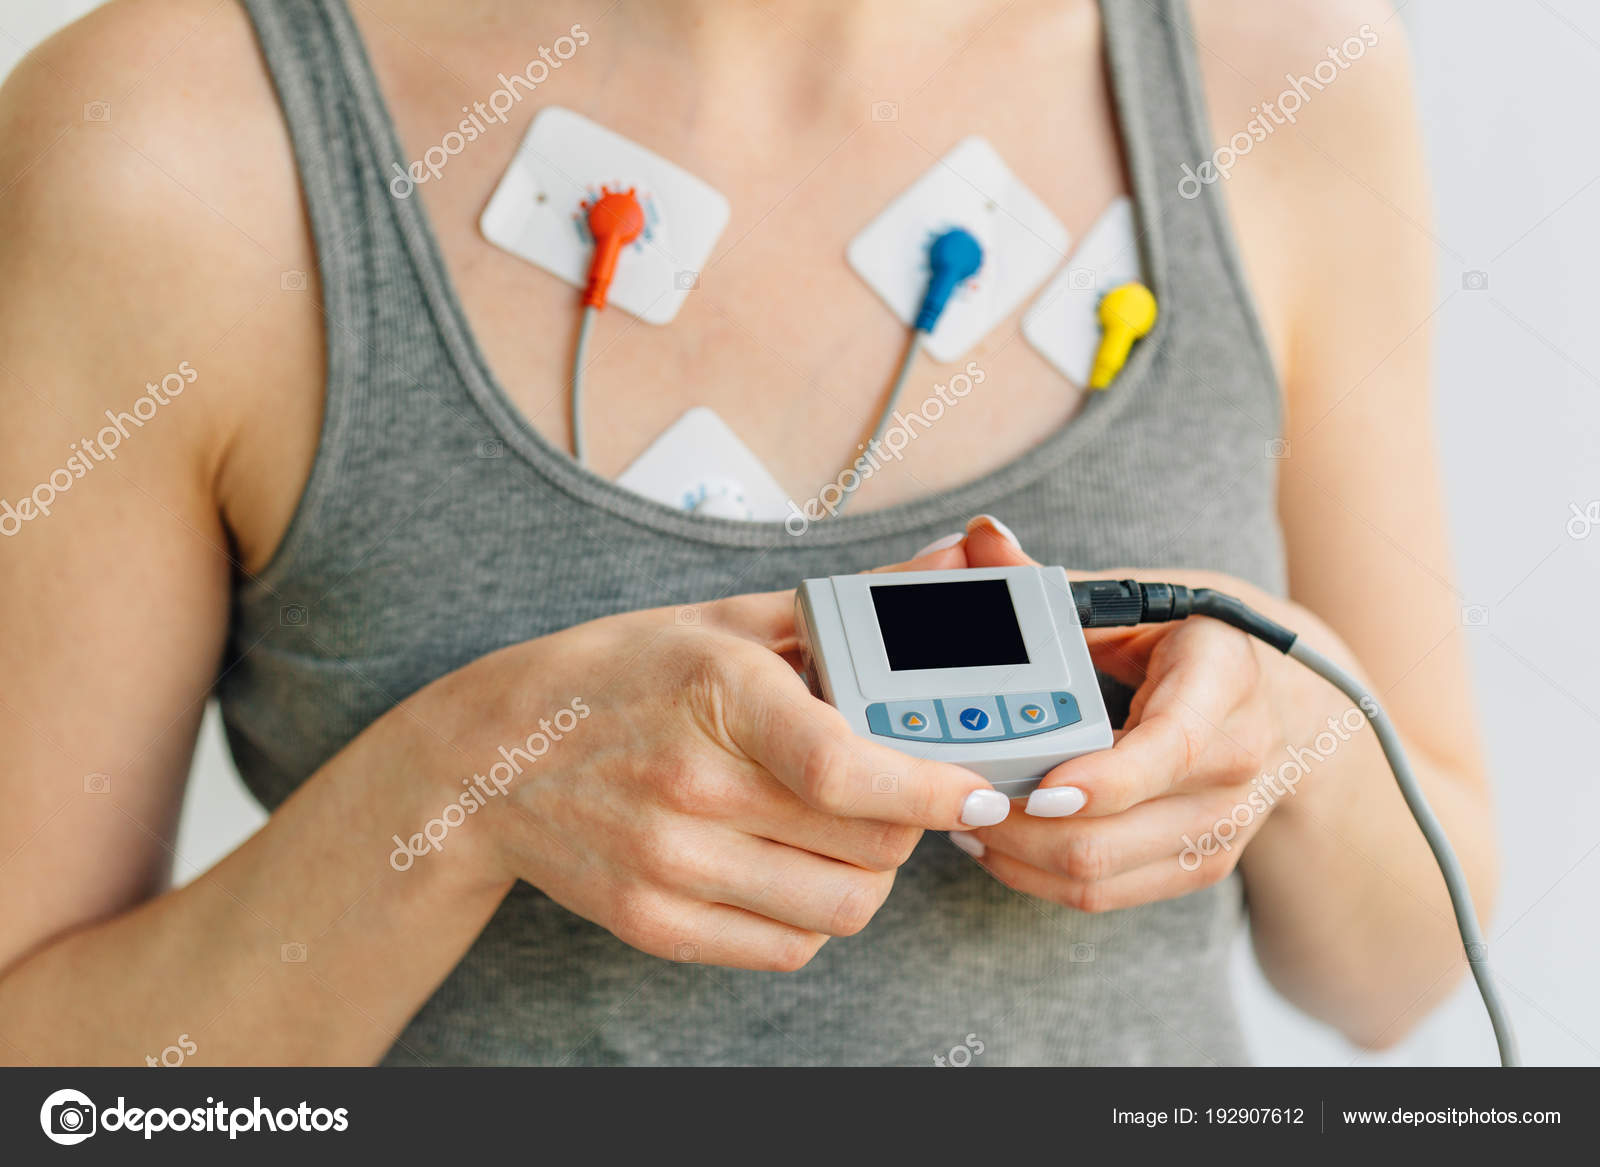 depositphotos_192907612-stock-photo-woman-wearing-holter-monitor-device.jpg